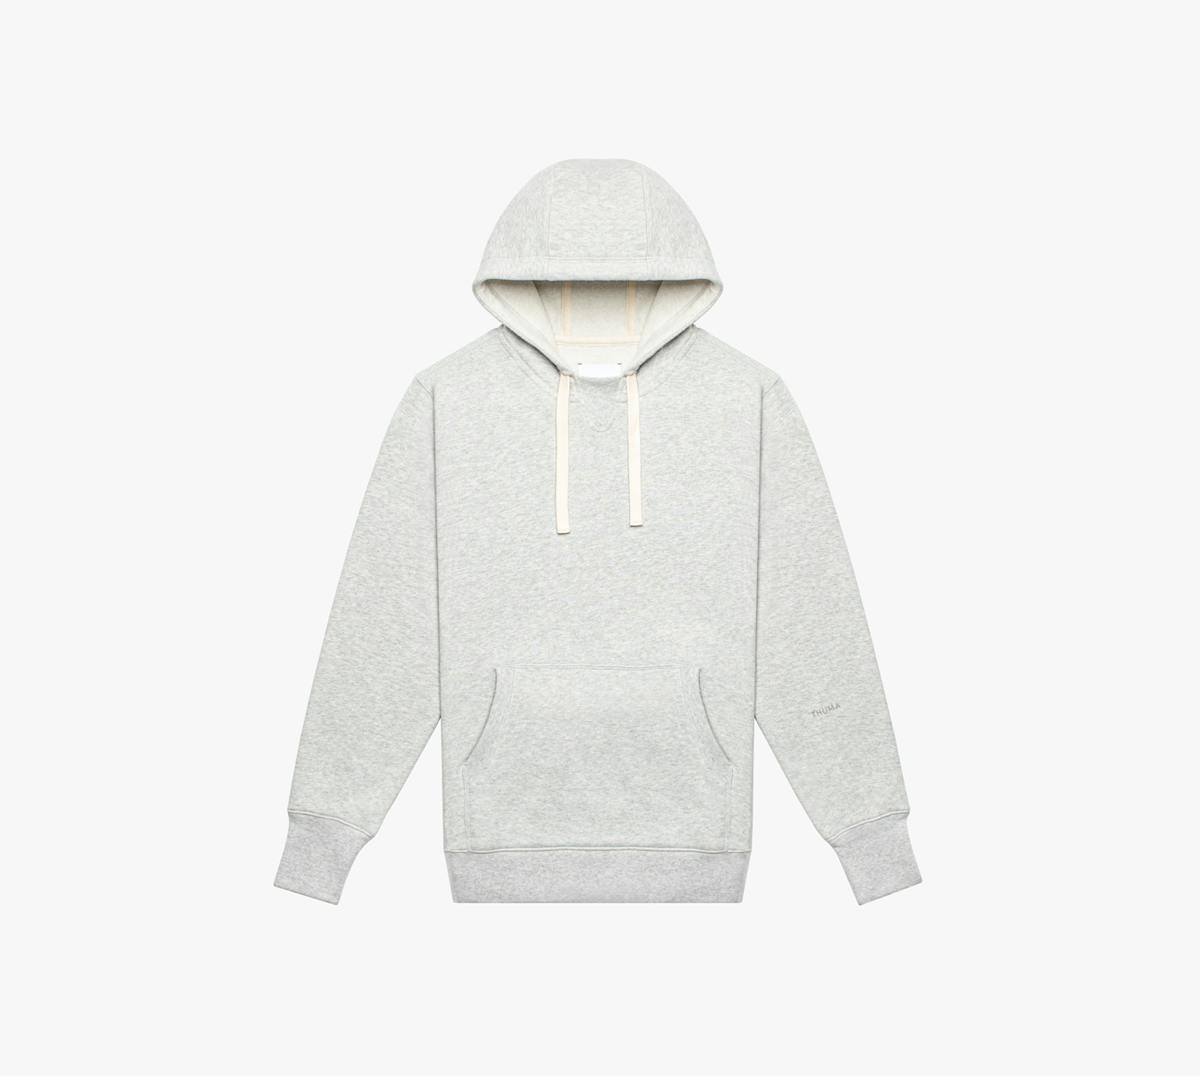 The oversized, tapered fit and luxe feel make the Lounge & Leisure Hoodie an instant go-to. Constructed with a premium, mid-weight looped French terry fabric, it features a ribbed mock neck, exposed flat lock stitching, reinforced hood with drawstring closure, and raw edge front kangaroo pocket. Designed for the Indoor Enthusiast.